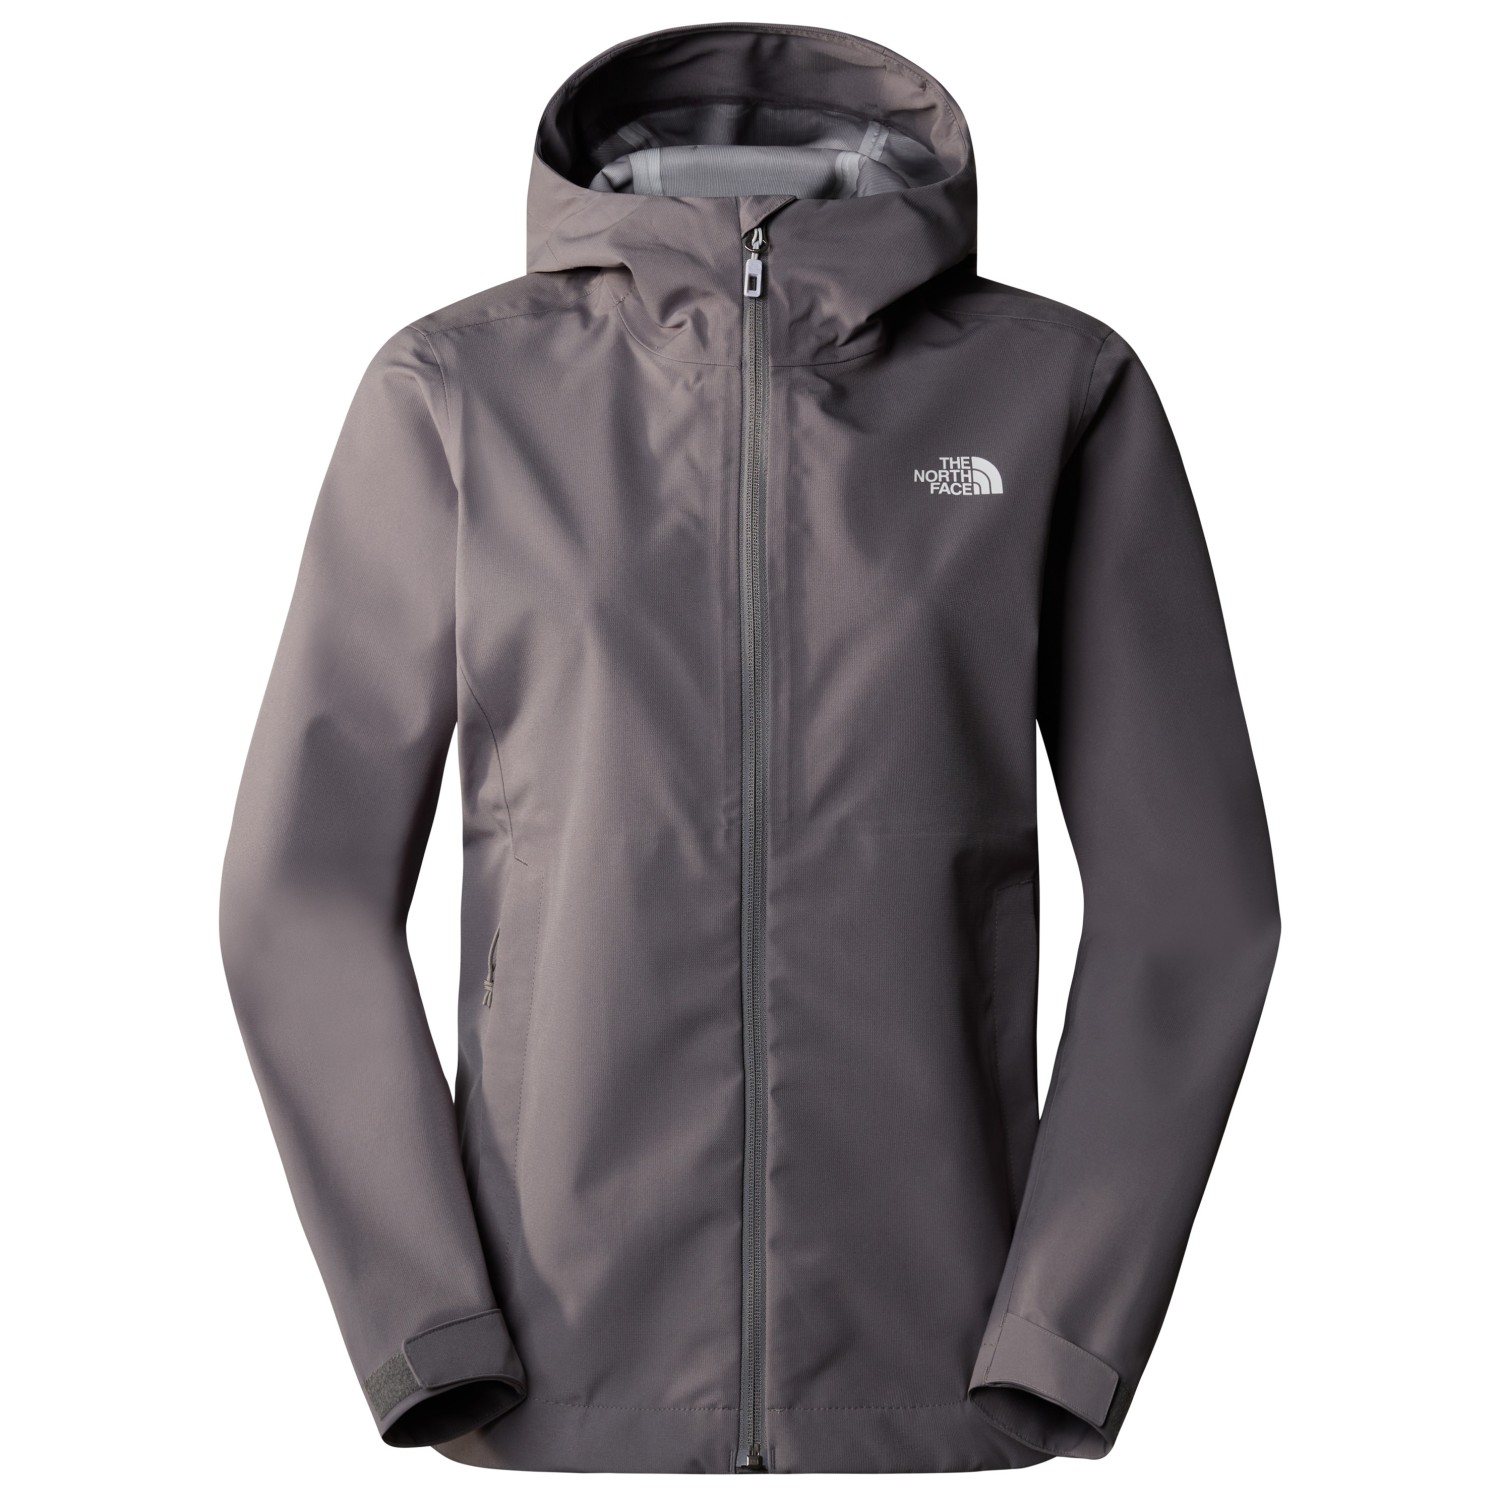 Дождевик The North Face Women's Whiton 3L, цвет Smoked Pearl